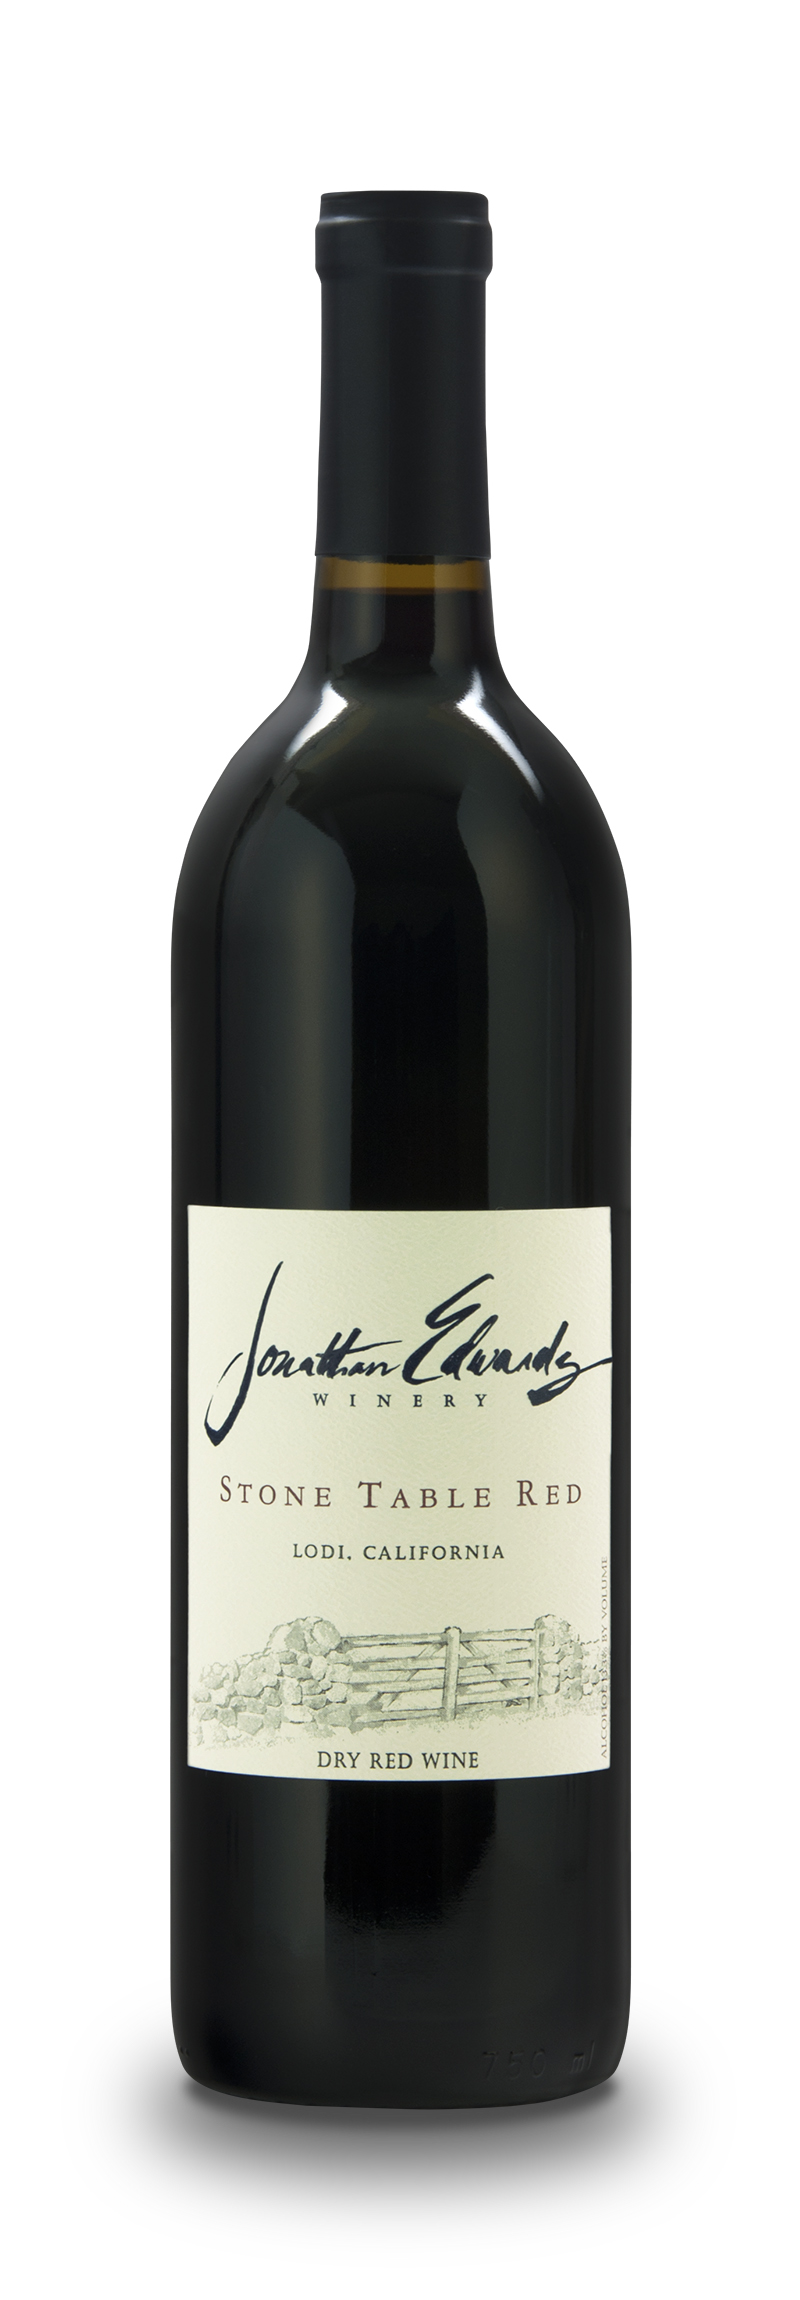 Product Image for Stone Table Red